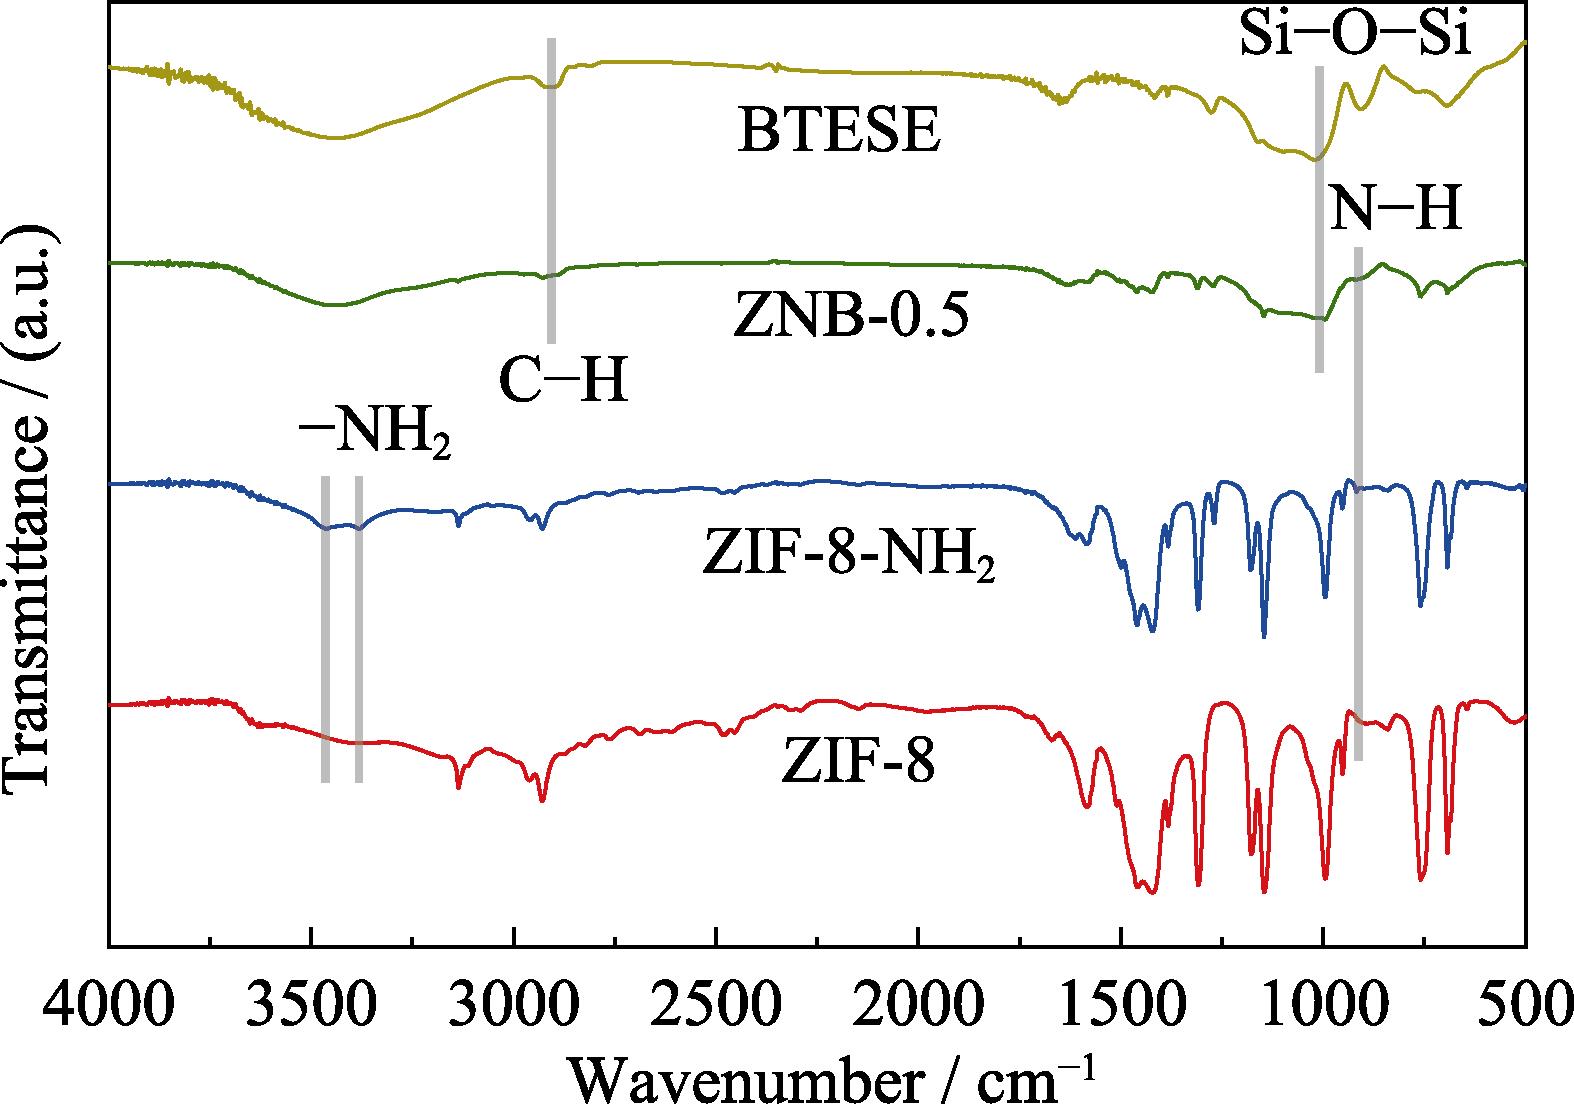 FT-IR spectra of samples ZIF-8, ZIF-8-NH2, BTESE and ZNB-0.5